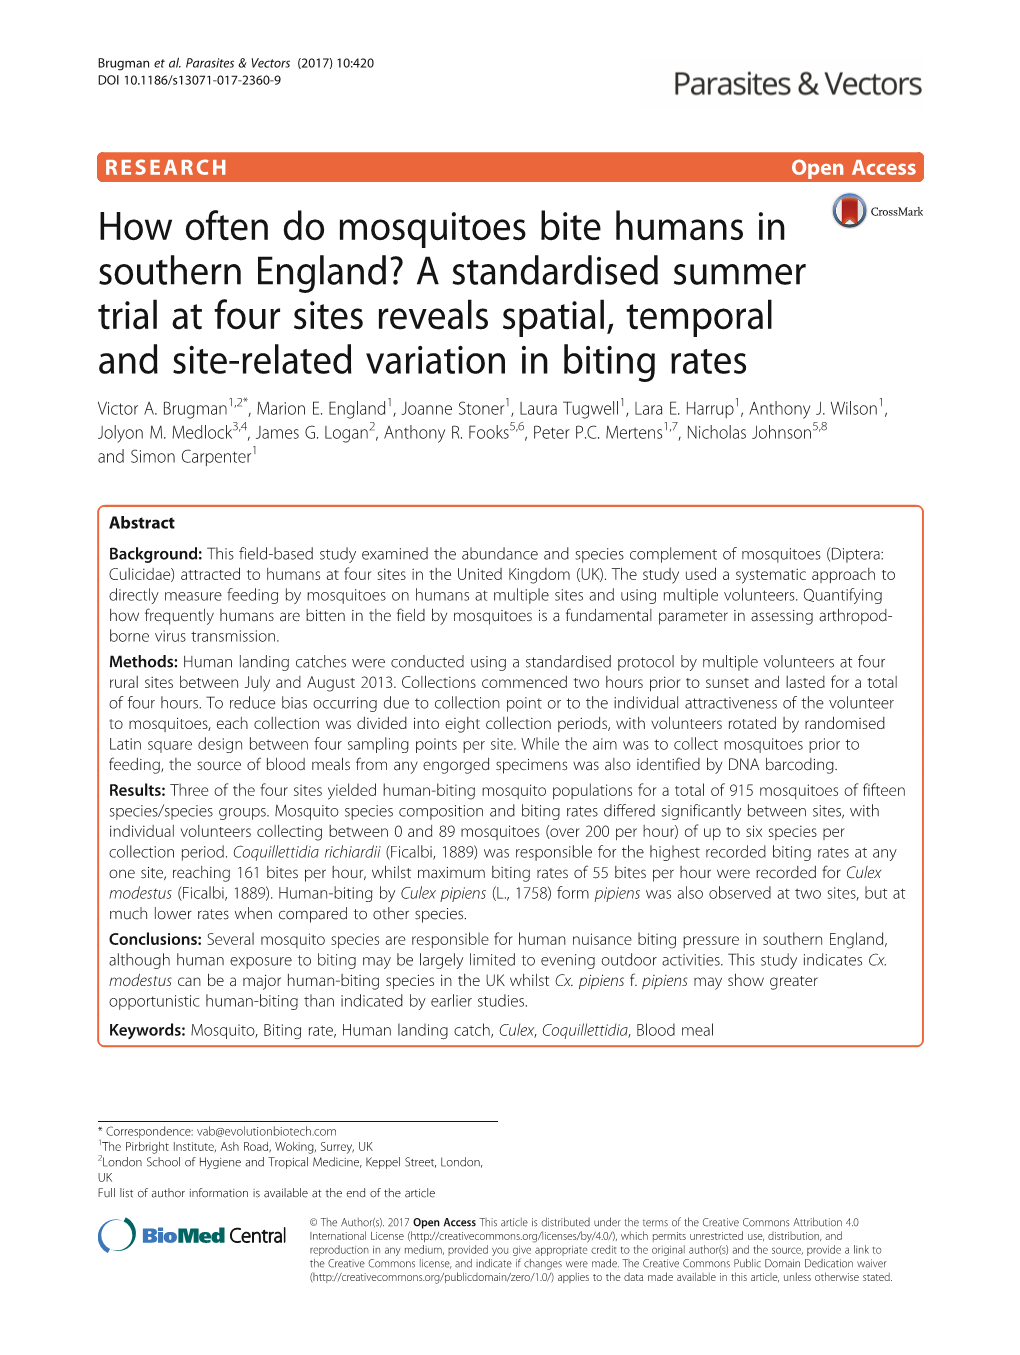 How Often Do Mosquitoes Bite Humans in Southern England? a Standardised Summer Trial at Four Sites Reveals Spatial, Temporal